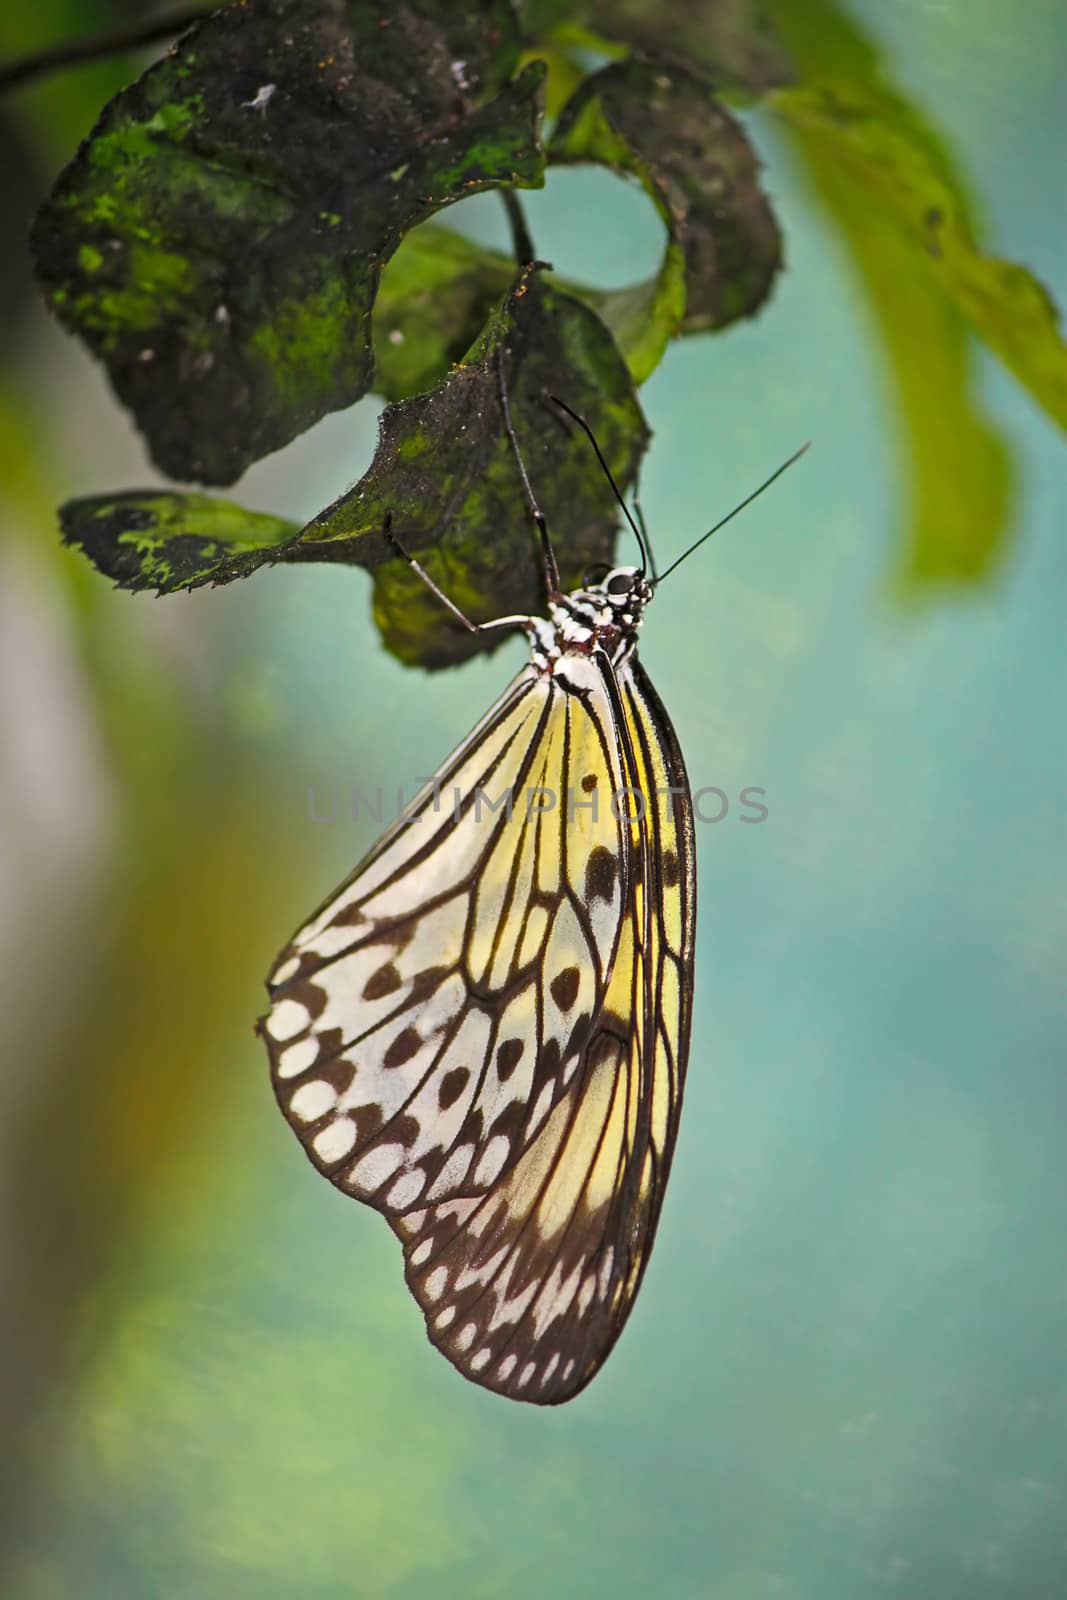 Beautiful tropical butterfly close-up, Thailand.Image with shallow depth of field.